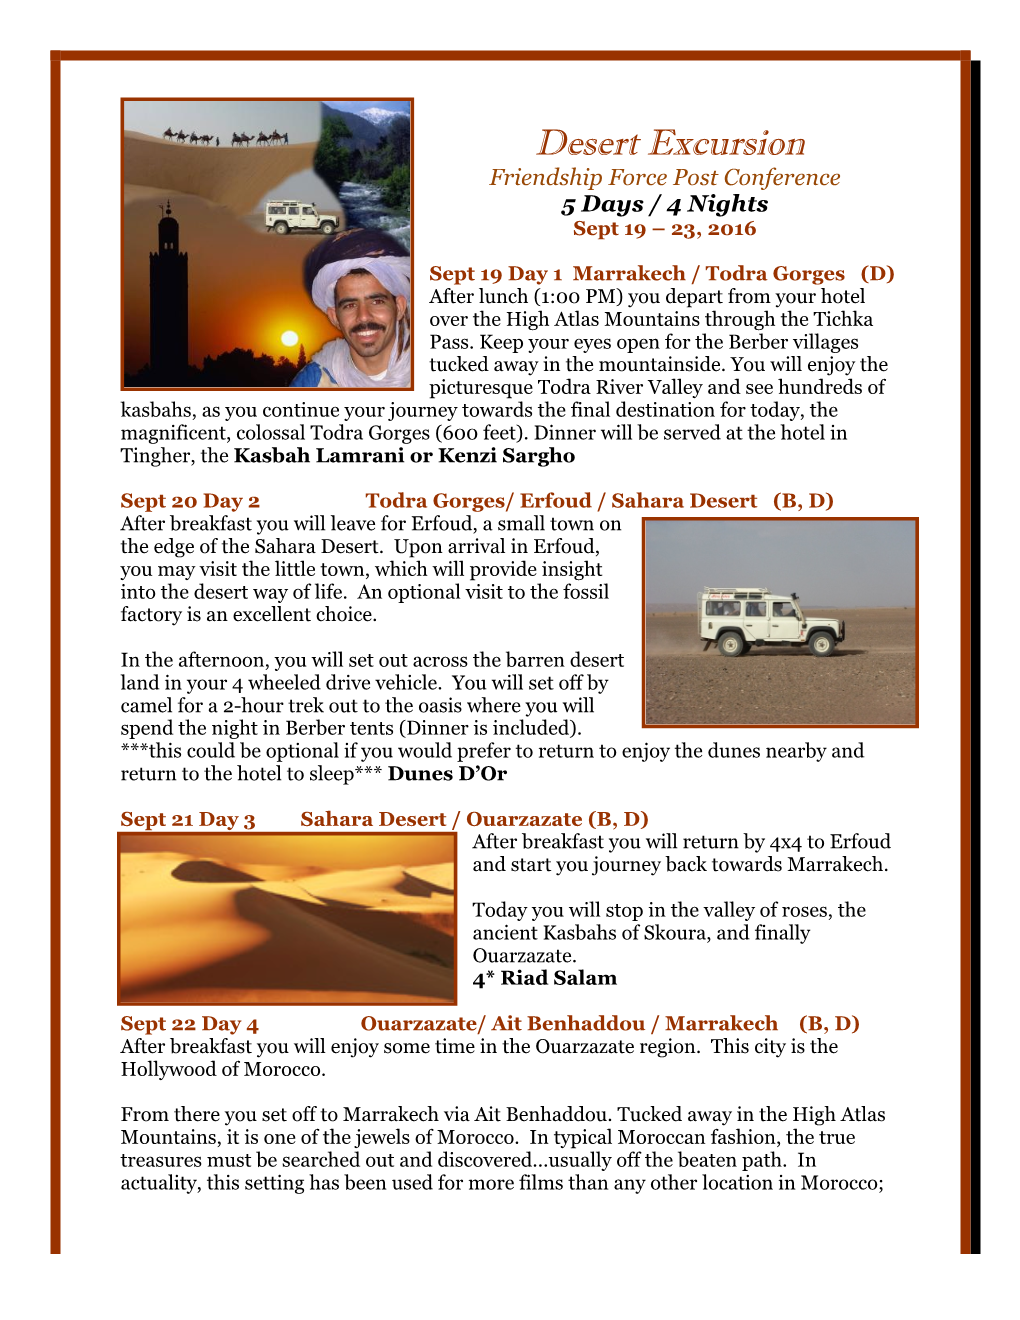 Desert Excursion Friendship Force Post Conference 5 Days / 4 Nights Sept 19 – 23, 2016